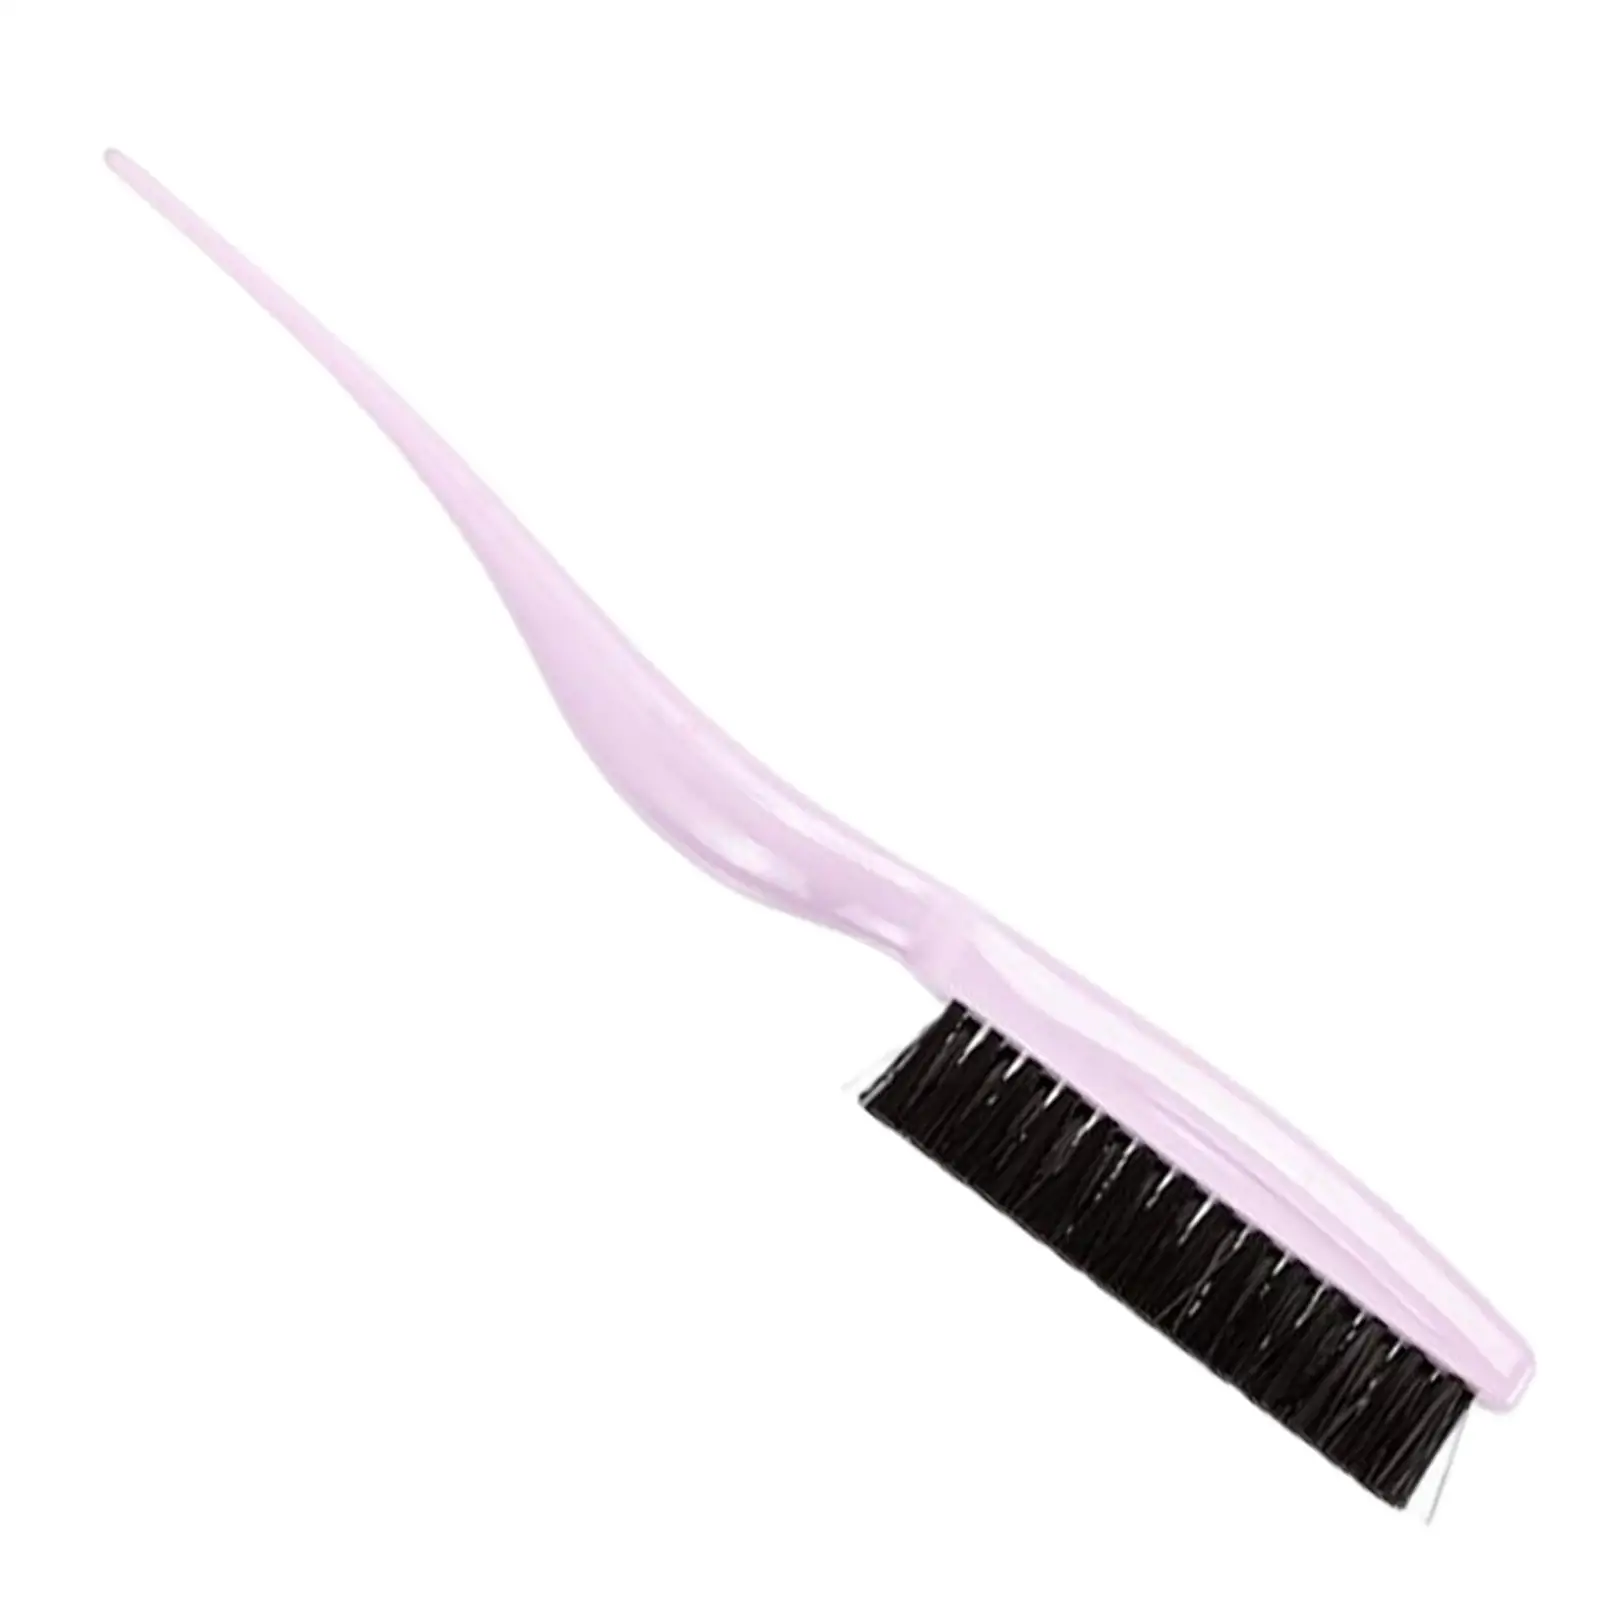 Teasing Hair Brushes 3 Row Comfortable Handle Professional Rat Tail Comb for Salon Beauty